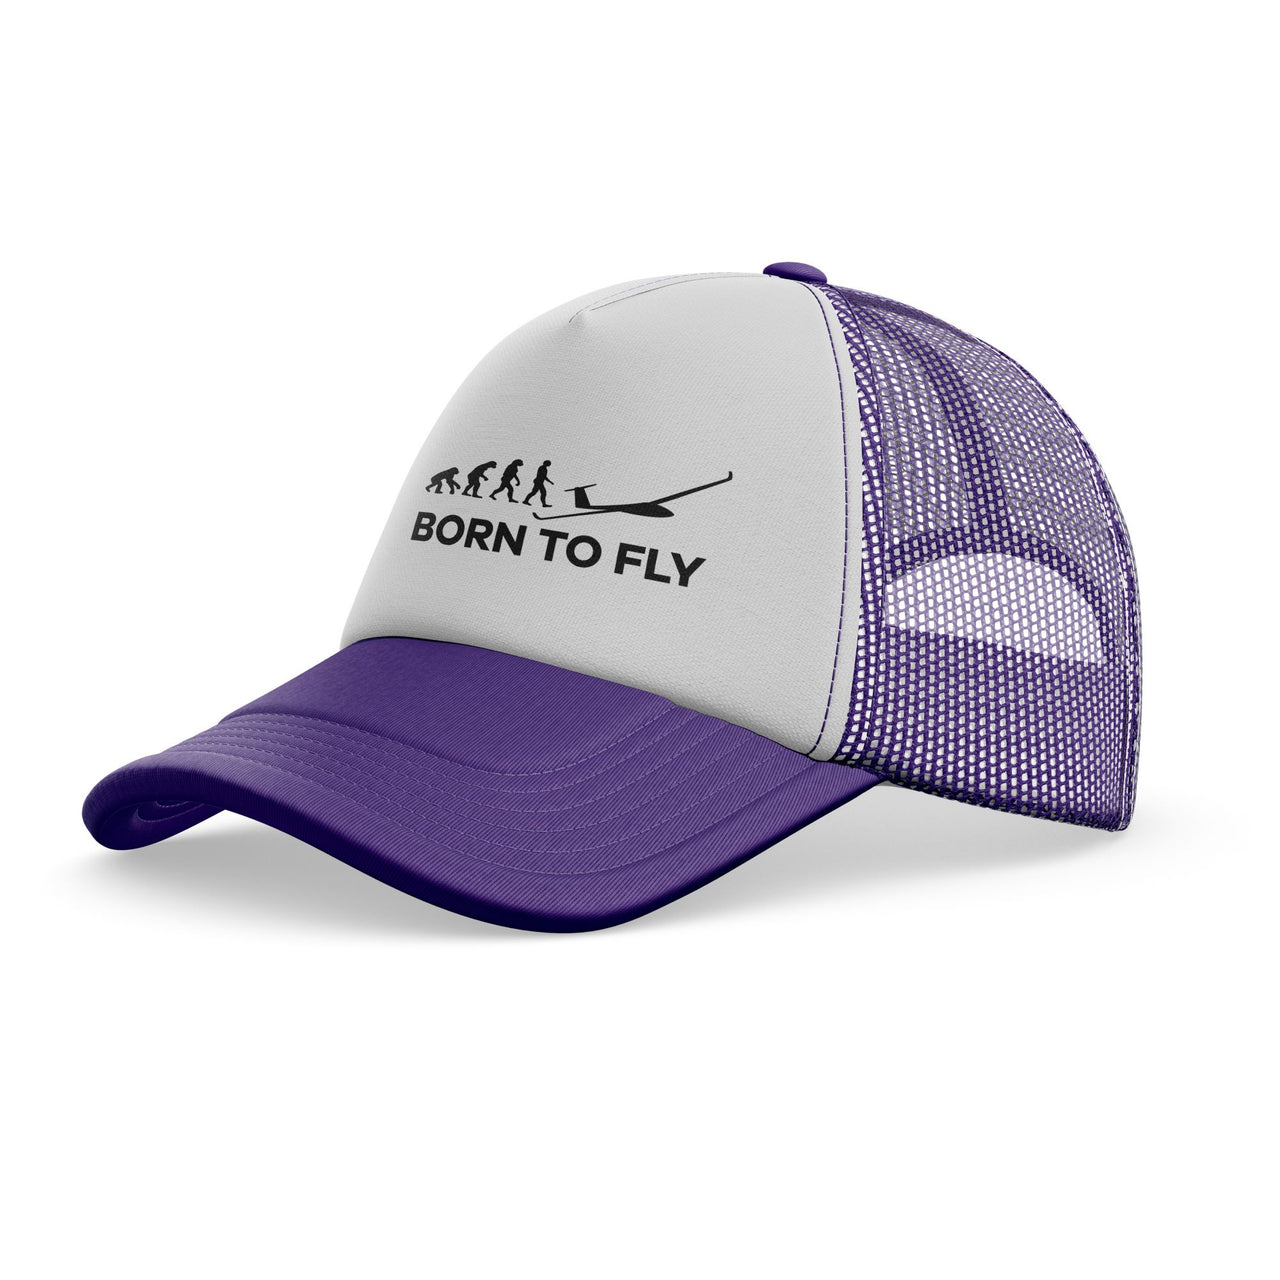 Born To Fly Glider Designed Trucker Caps & Hats